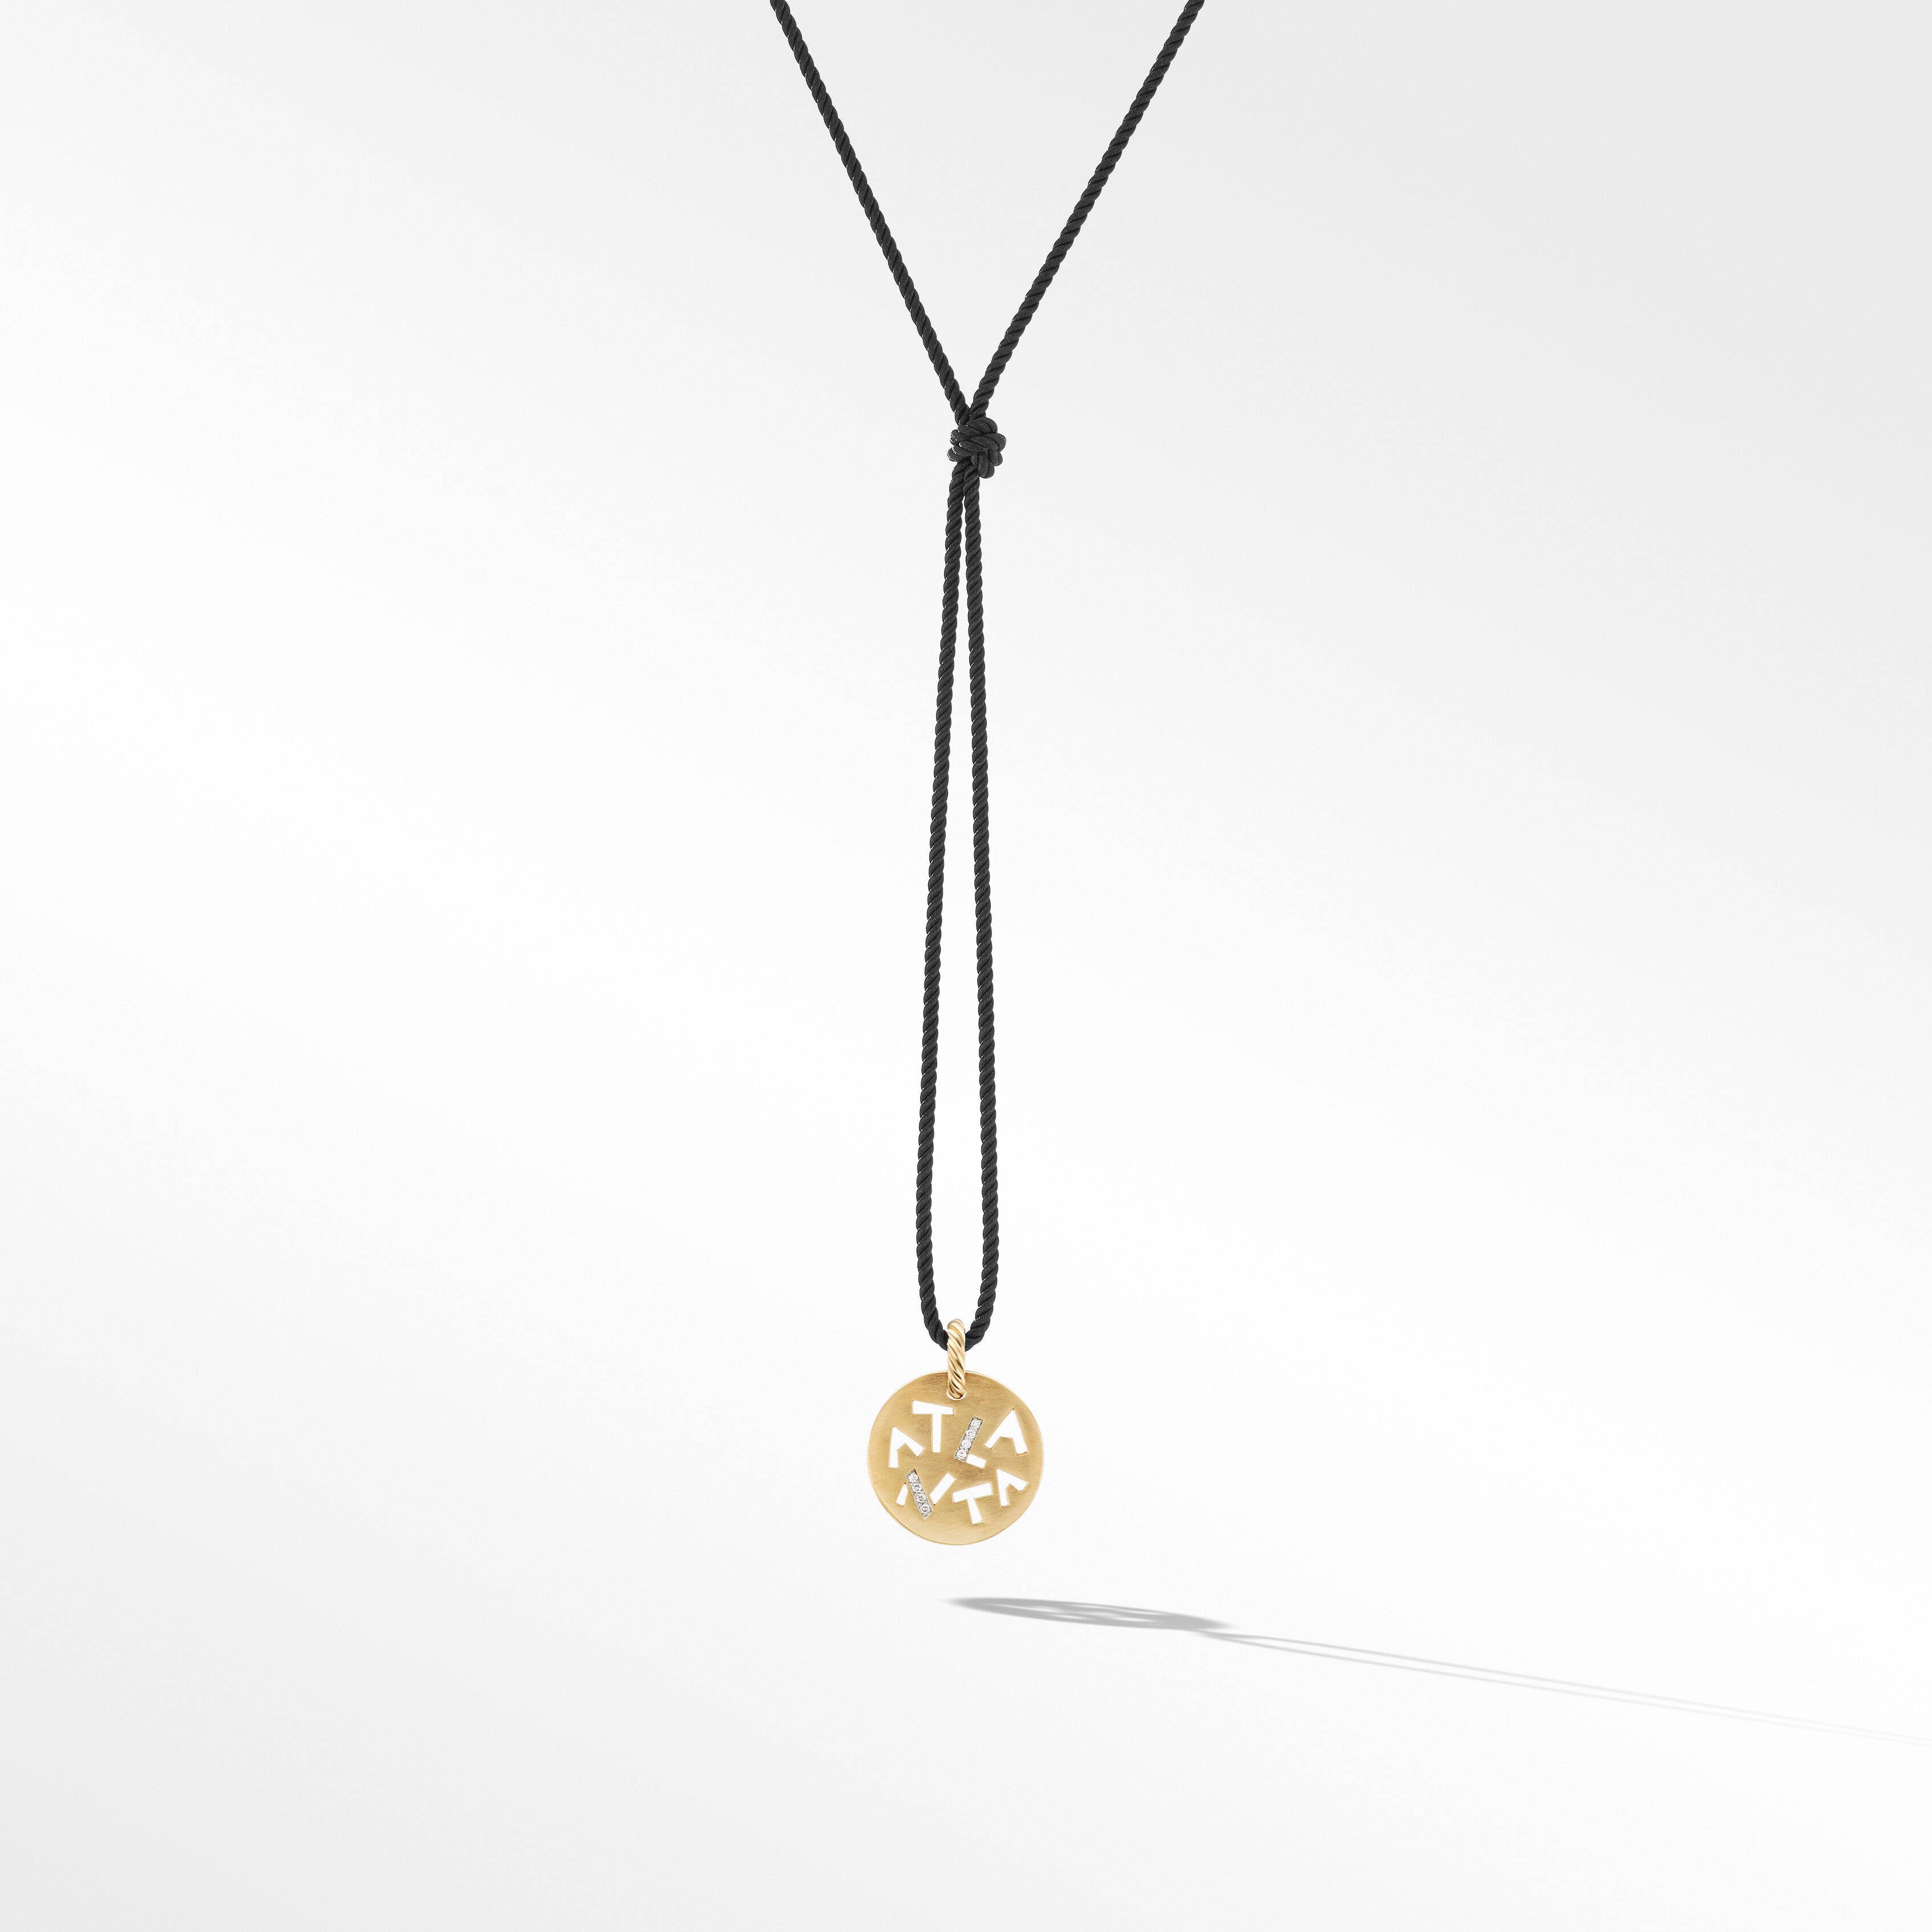 DY Elements® Atlanta Pendant Necklace in 18K Yellow Gold with Diamonds